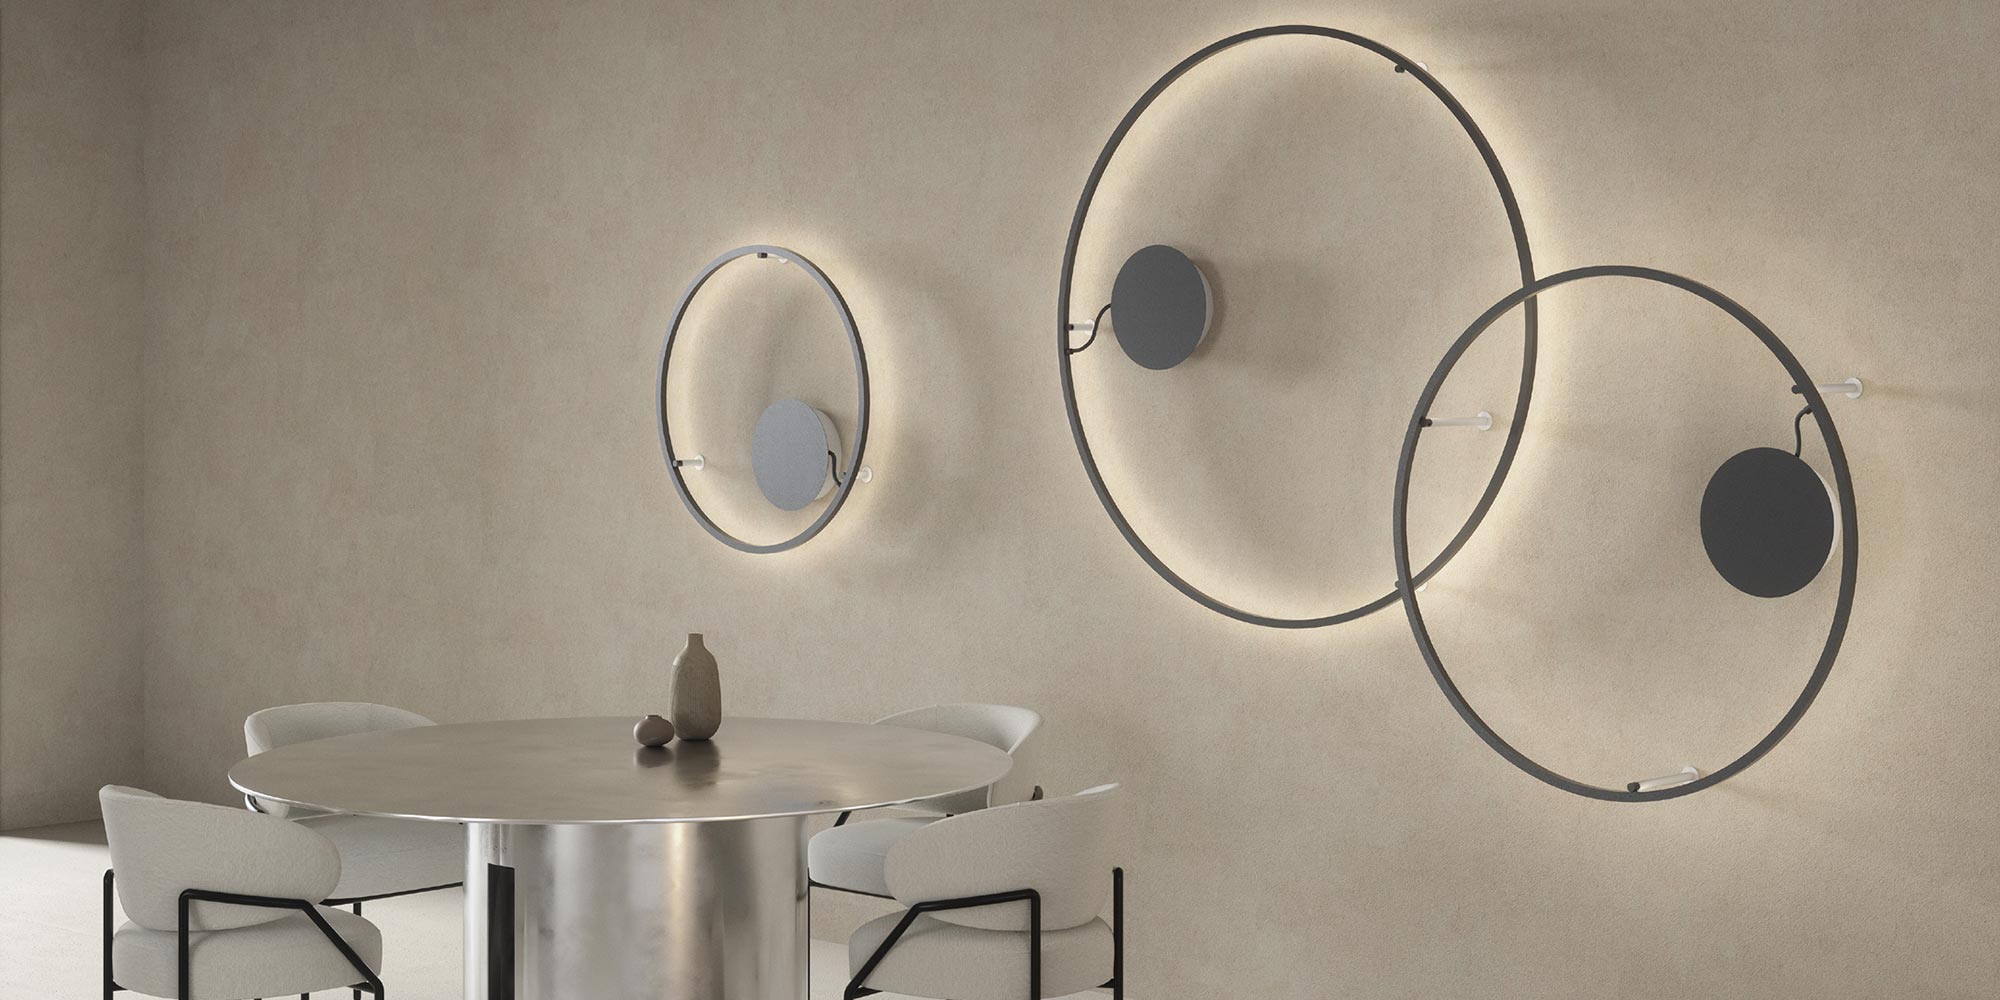 Rings refers to an illumination system with a circular-shaped light fixture or light arrangement. Architects and designers increasingly turn to ring-shaped luminaires for their versatility. Their beauty lies in their ability to combine form and function seamlessly. This month, we are excited to present a selection of options from our manufacturers that will meet your needs.